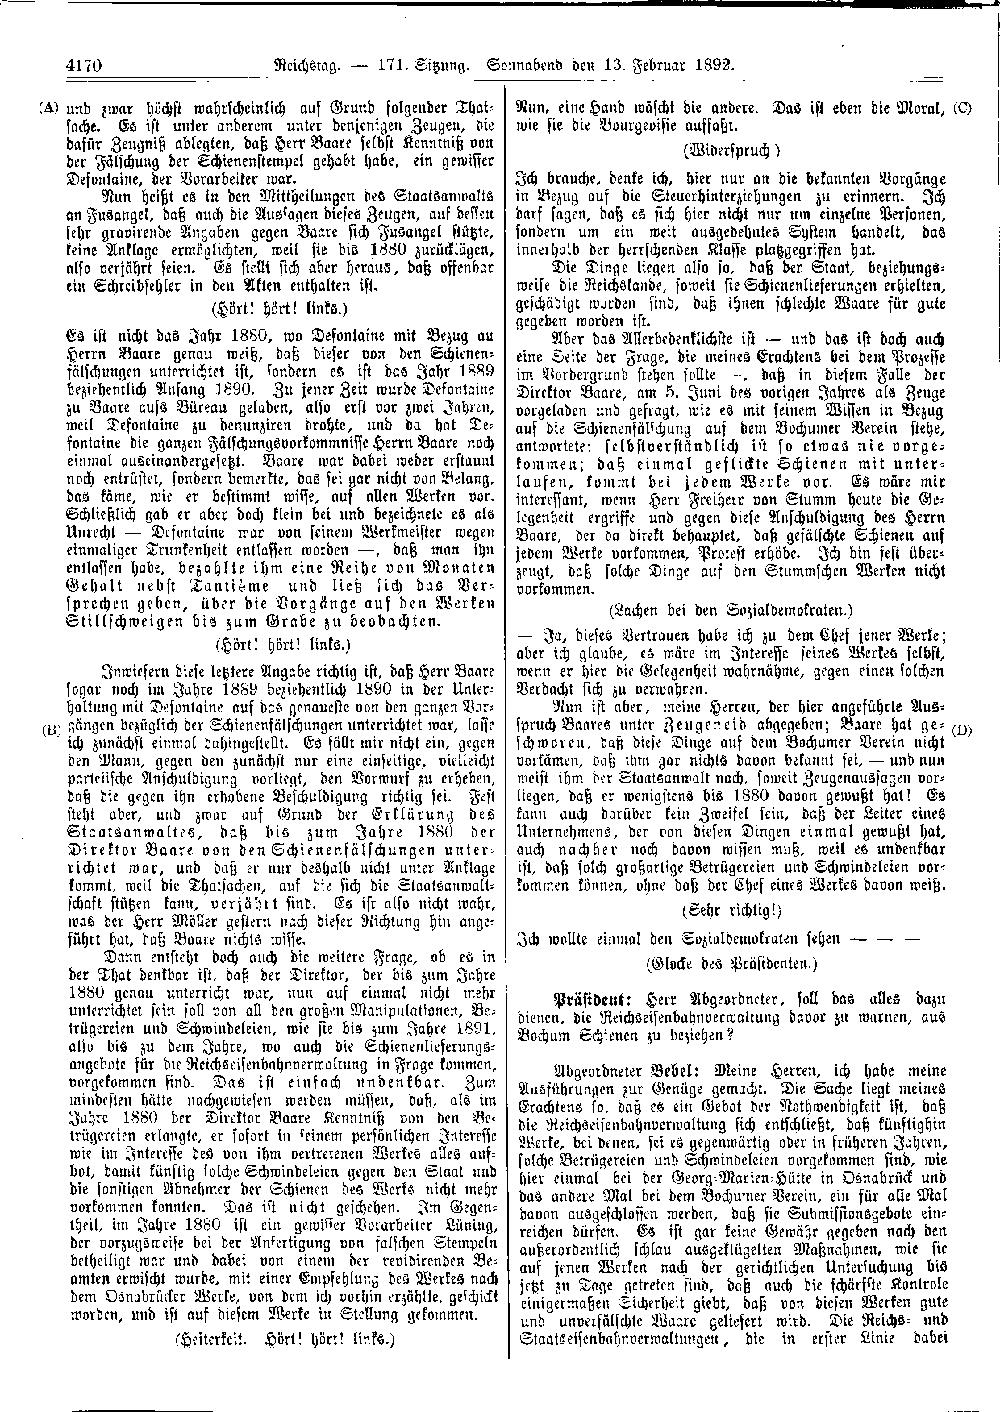 Scan of page 4170